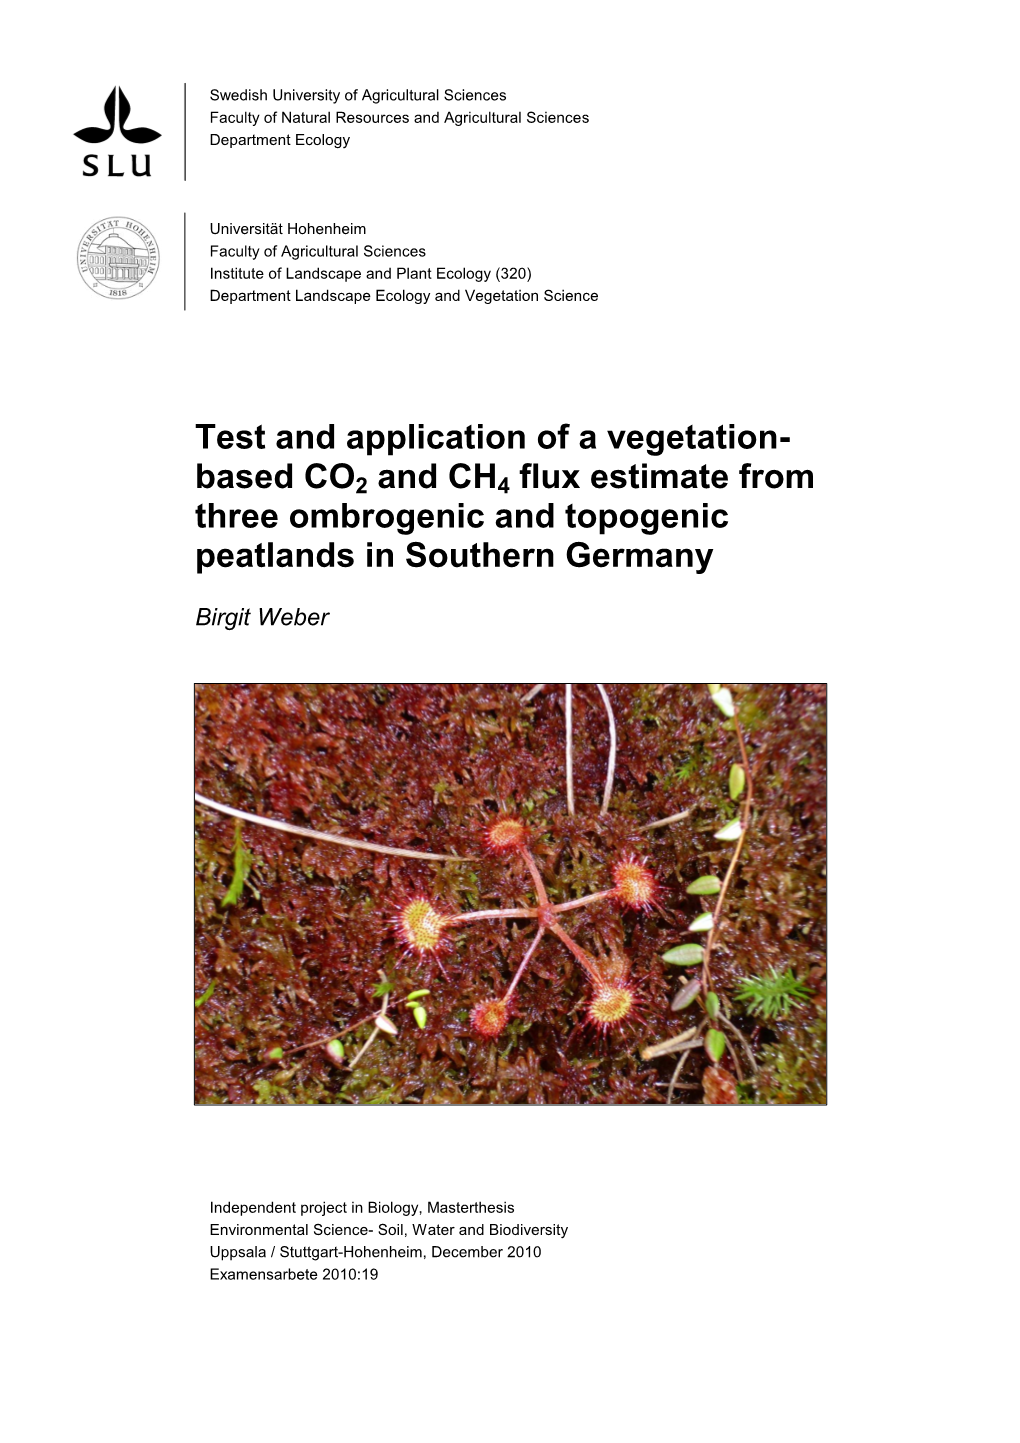 Test and Application of a Vegetation- Based CO 2 and CH 4 Flux Estimate from Three Ombrogenic and Topogenic Peatlands in Southern Germany